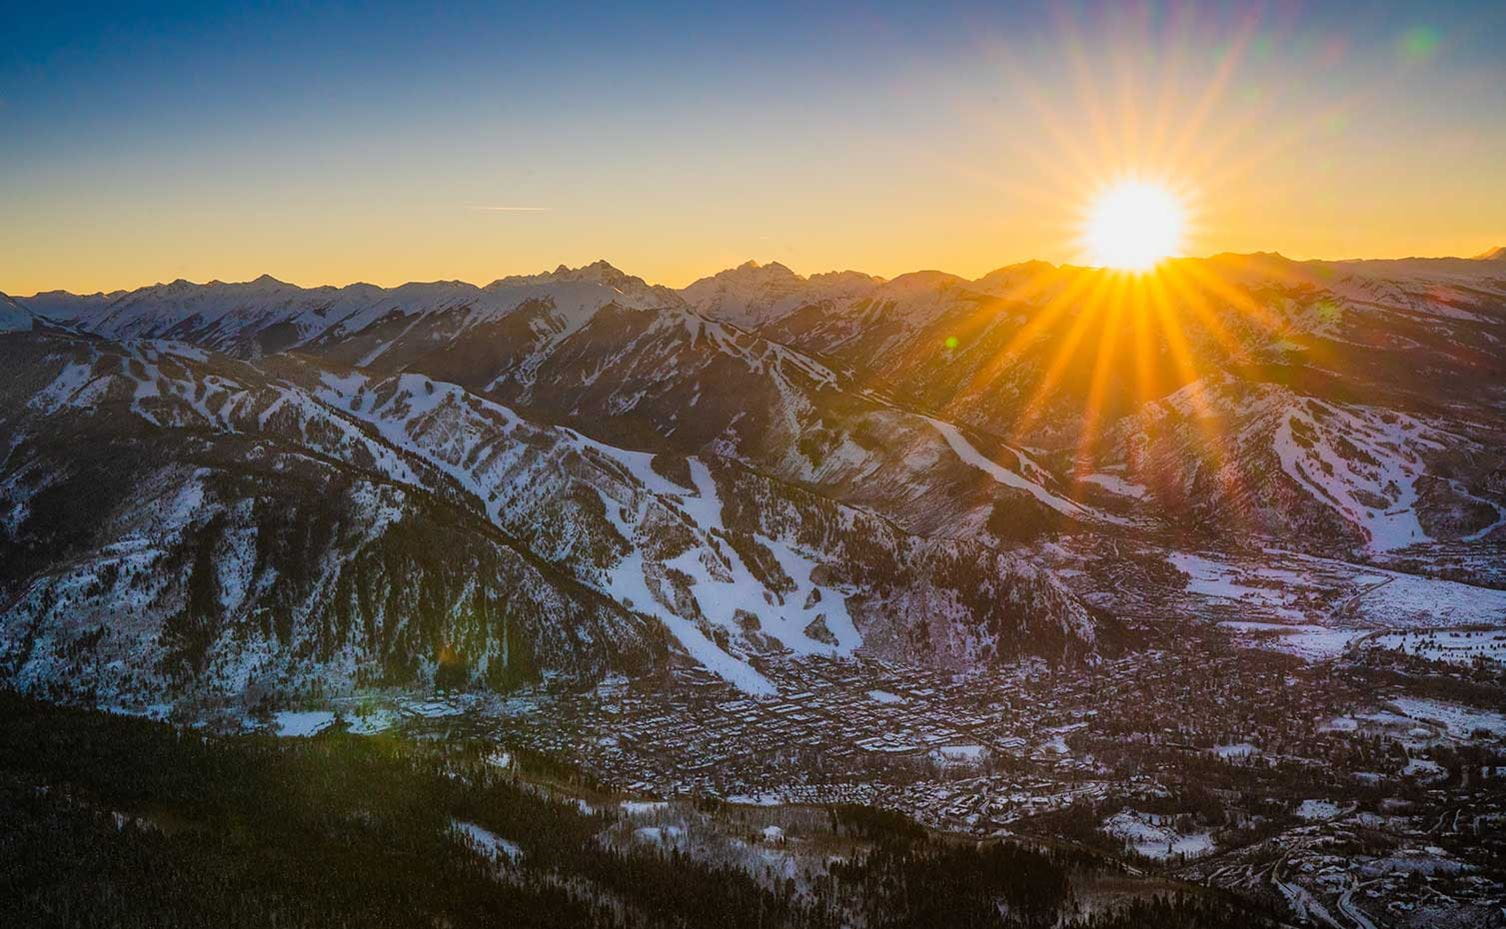 Sunset over Aspen Snowmass and the Elk Mountains, Colorado